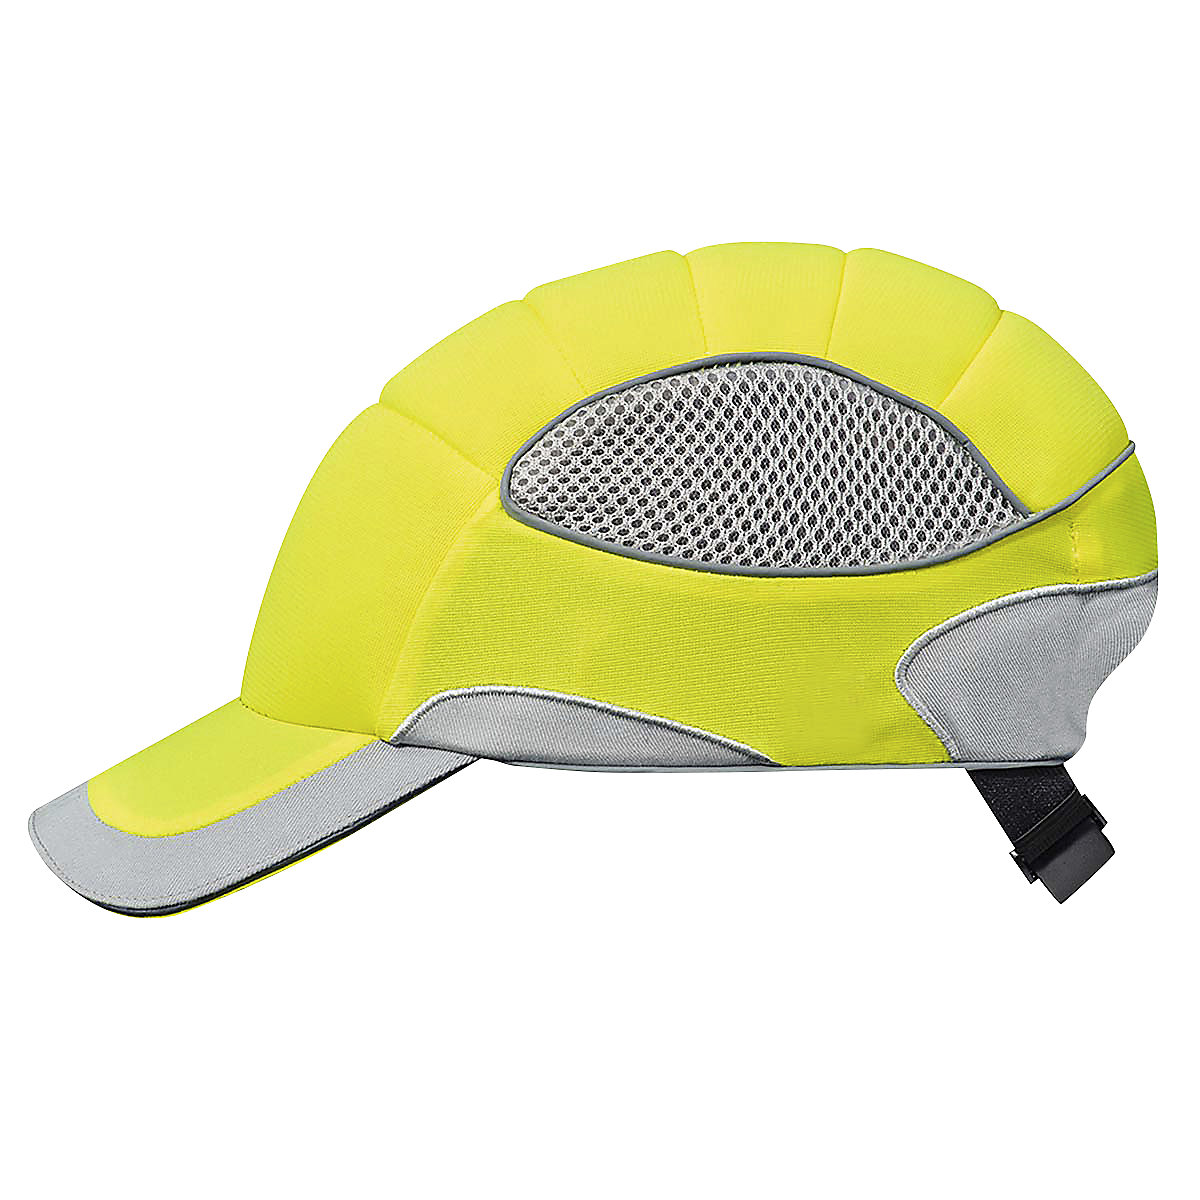 Bump cap with ABS shell – VOSS HELME, fabric cover, neon yellow-2